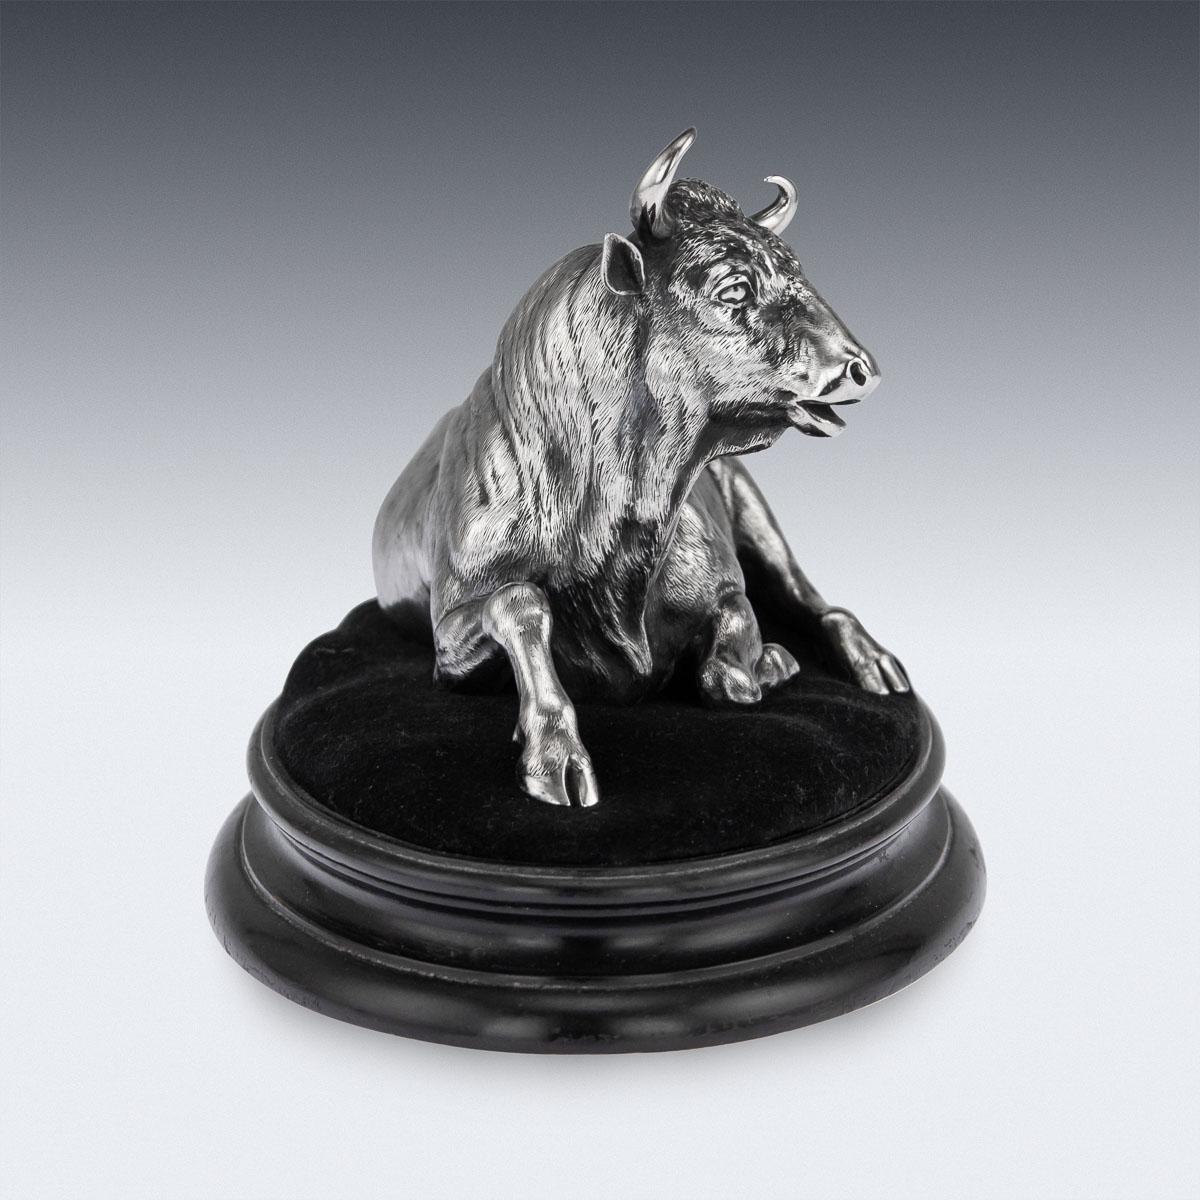 19th Century 19thC French Solid Silver Bull On Stand, Christofle, Paris c.1860